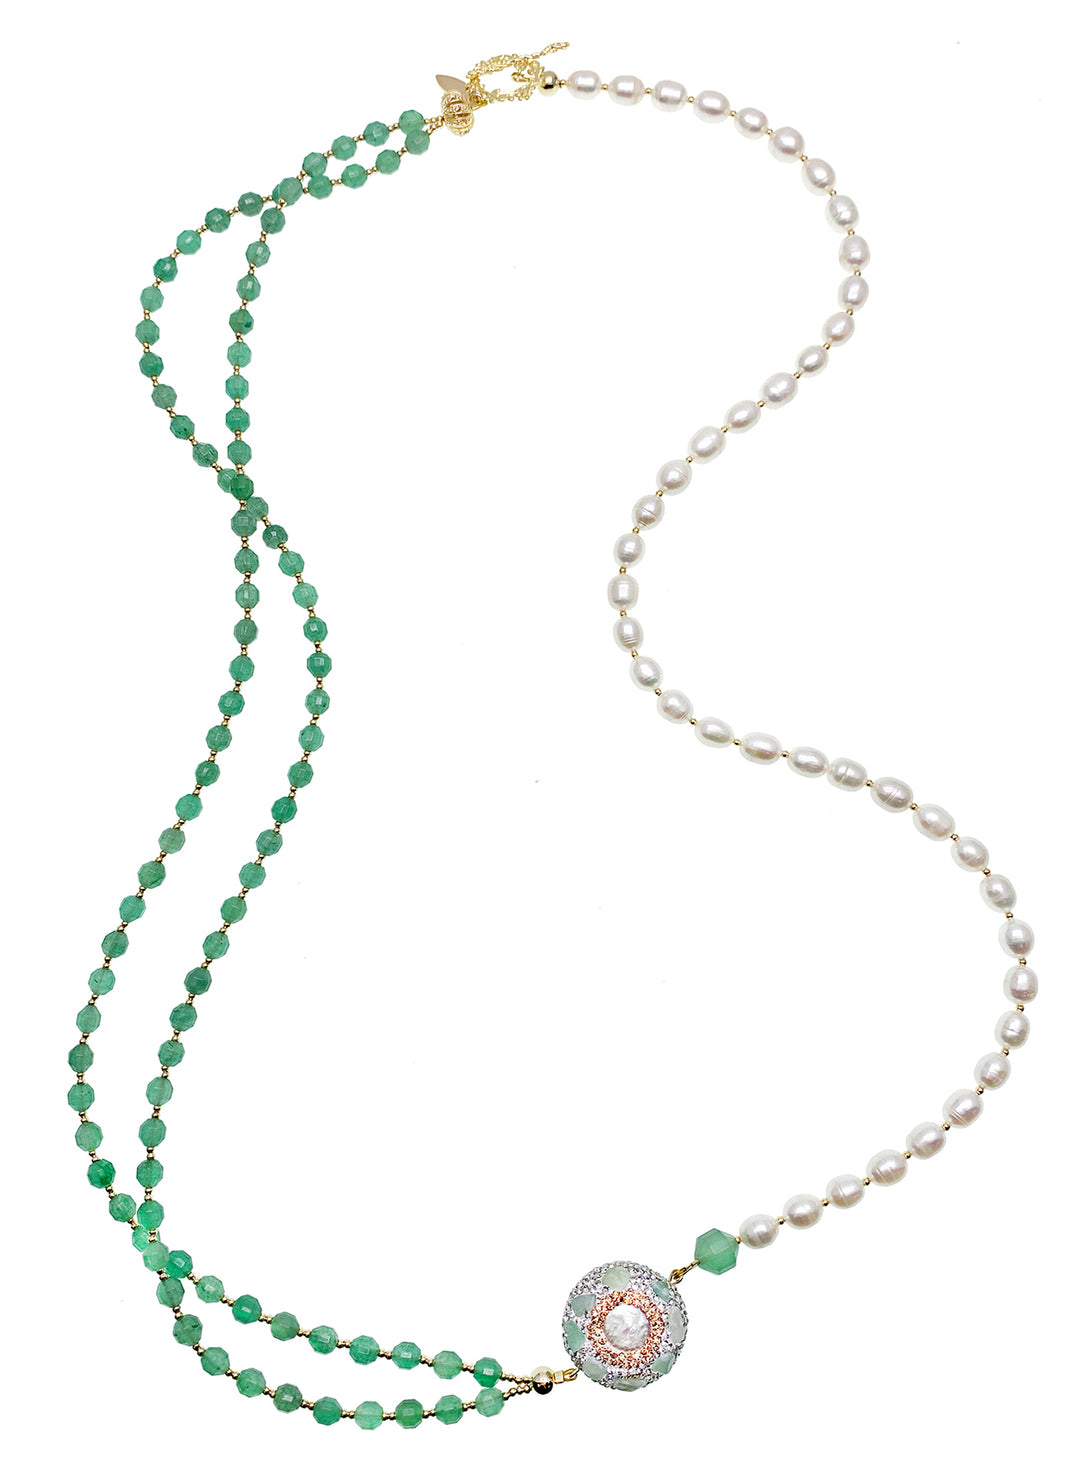 Green Aventurine And Pearls With Rhinestone Long Necklace HN016 - FARRA